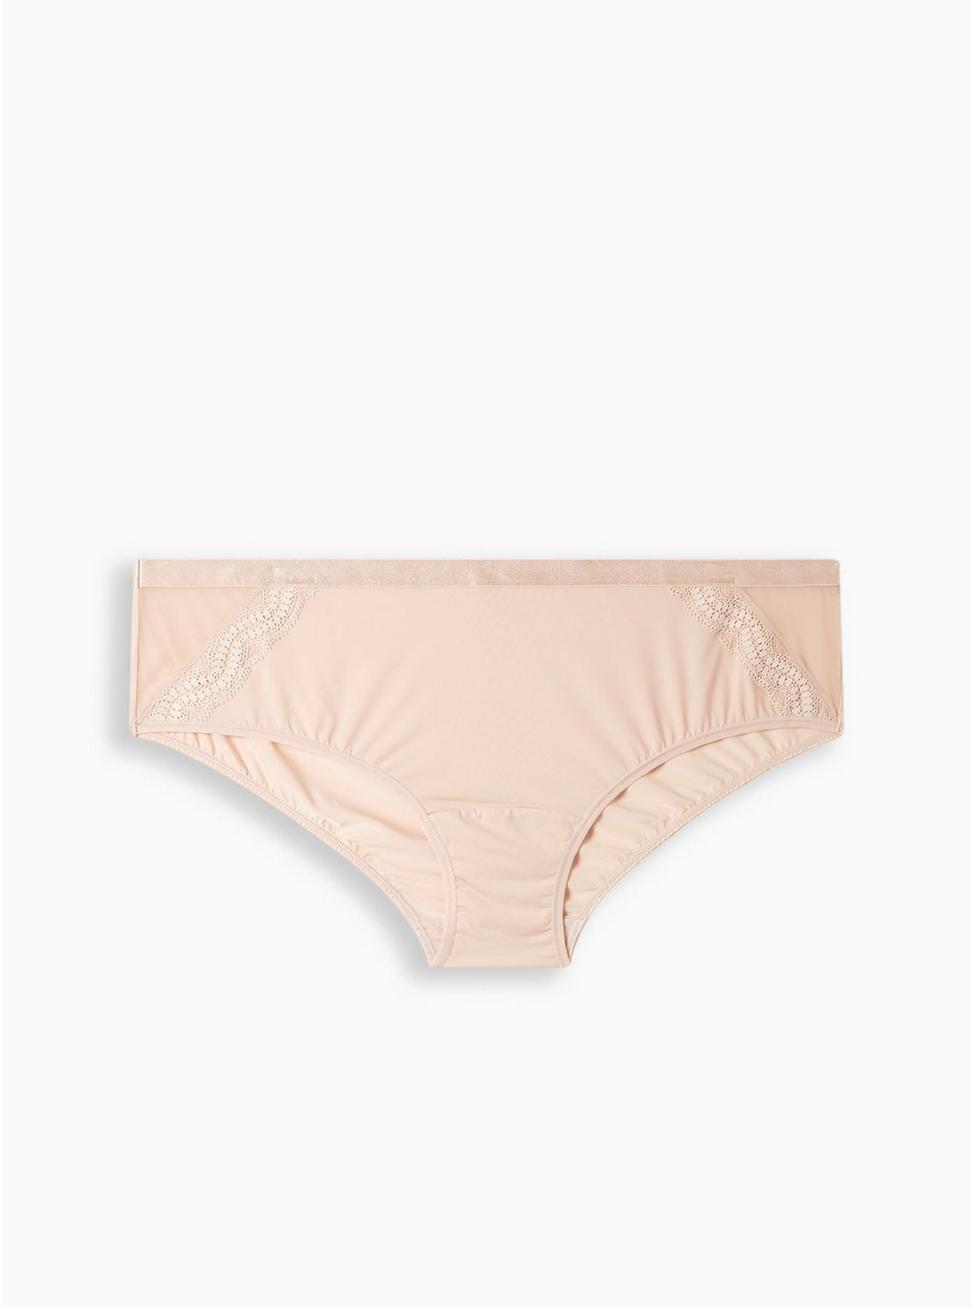 Second Skin Mid-Rise Hipster Panty, ROSE DUST, hi-res